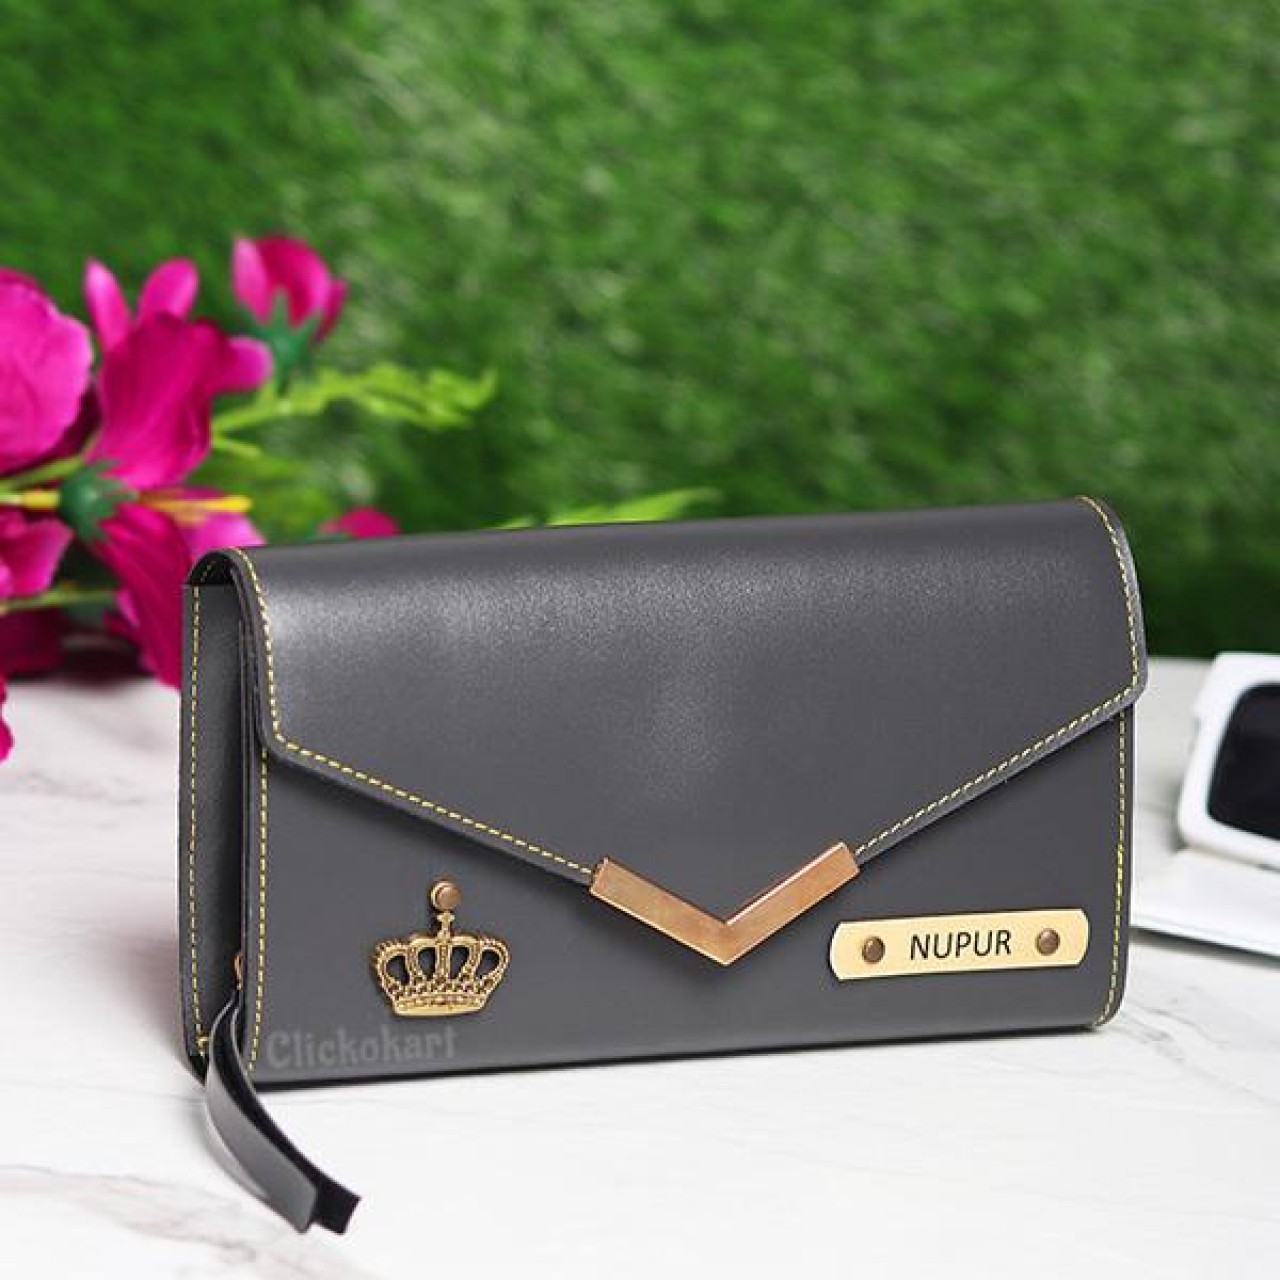 Personalised ladies clutch with charm grey color